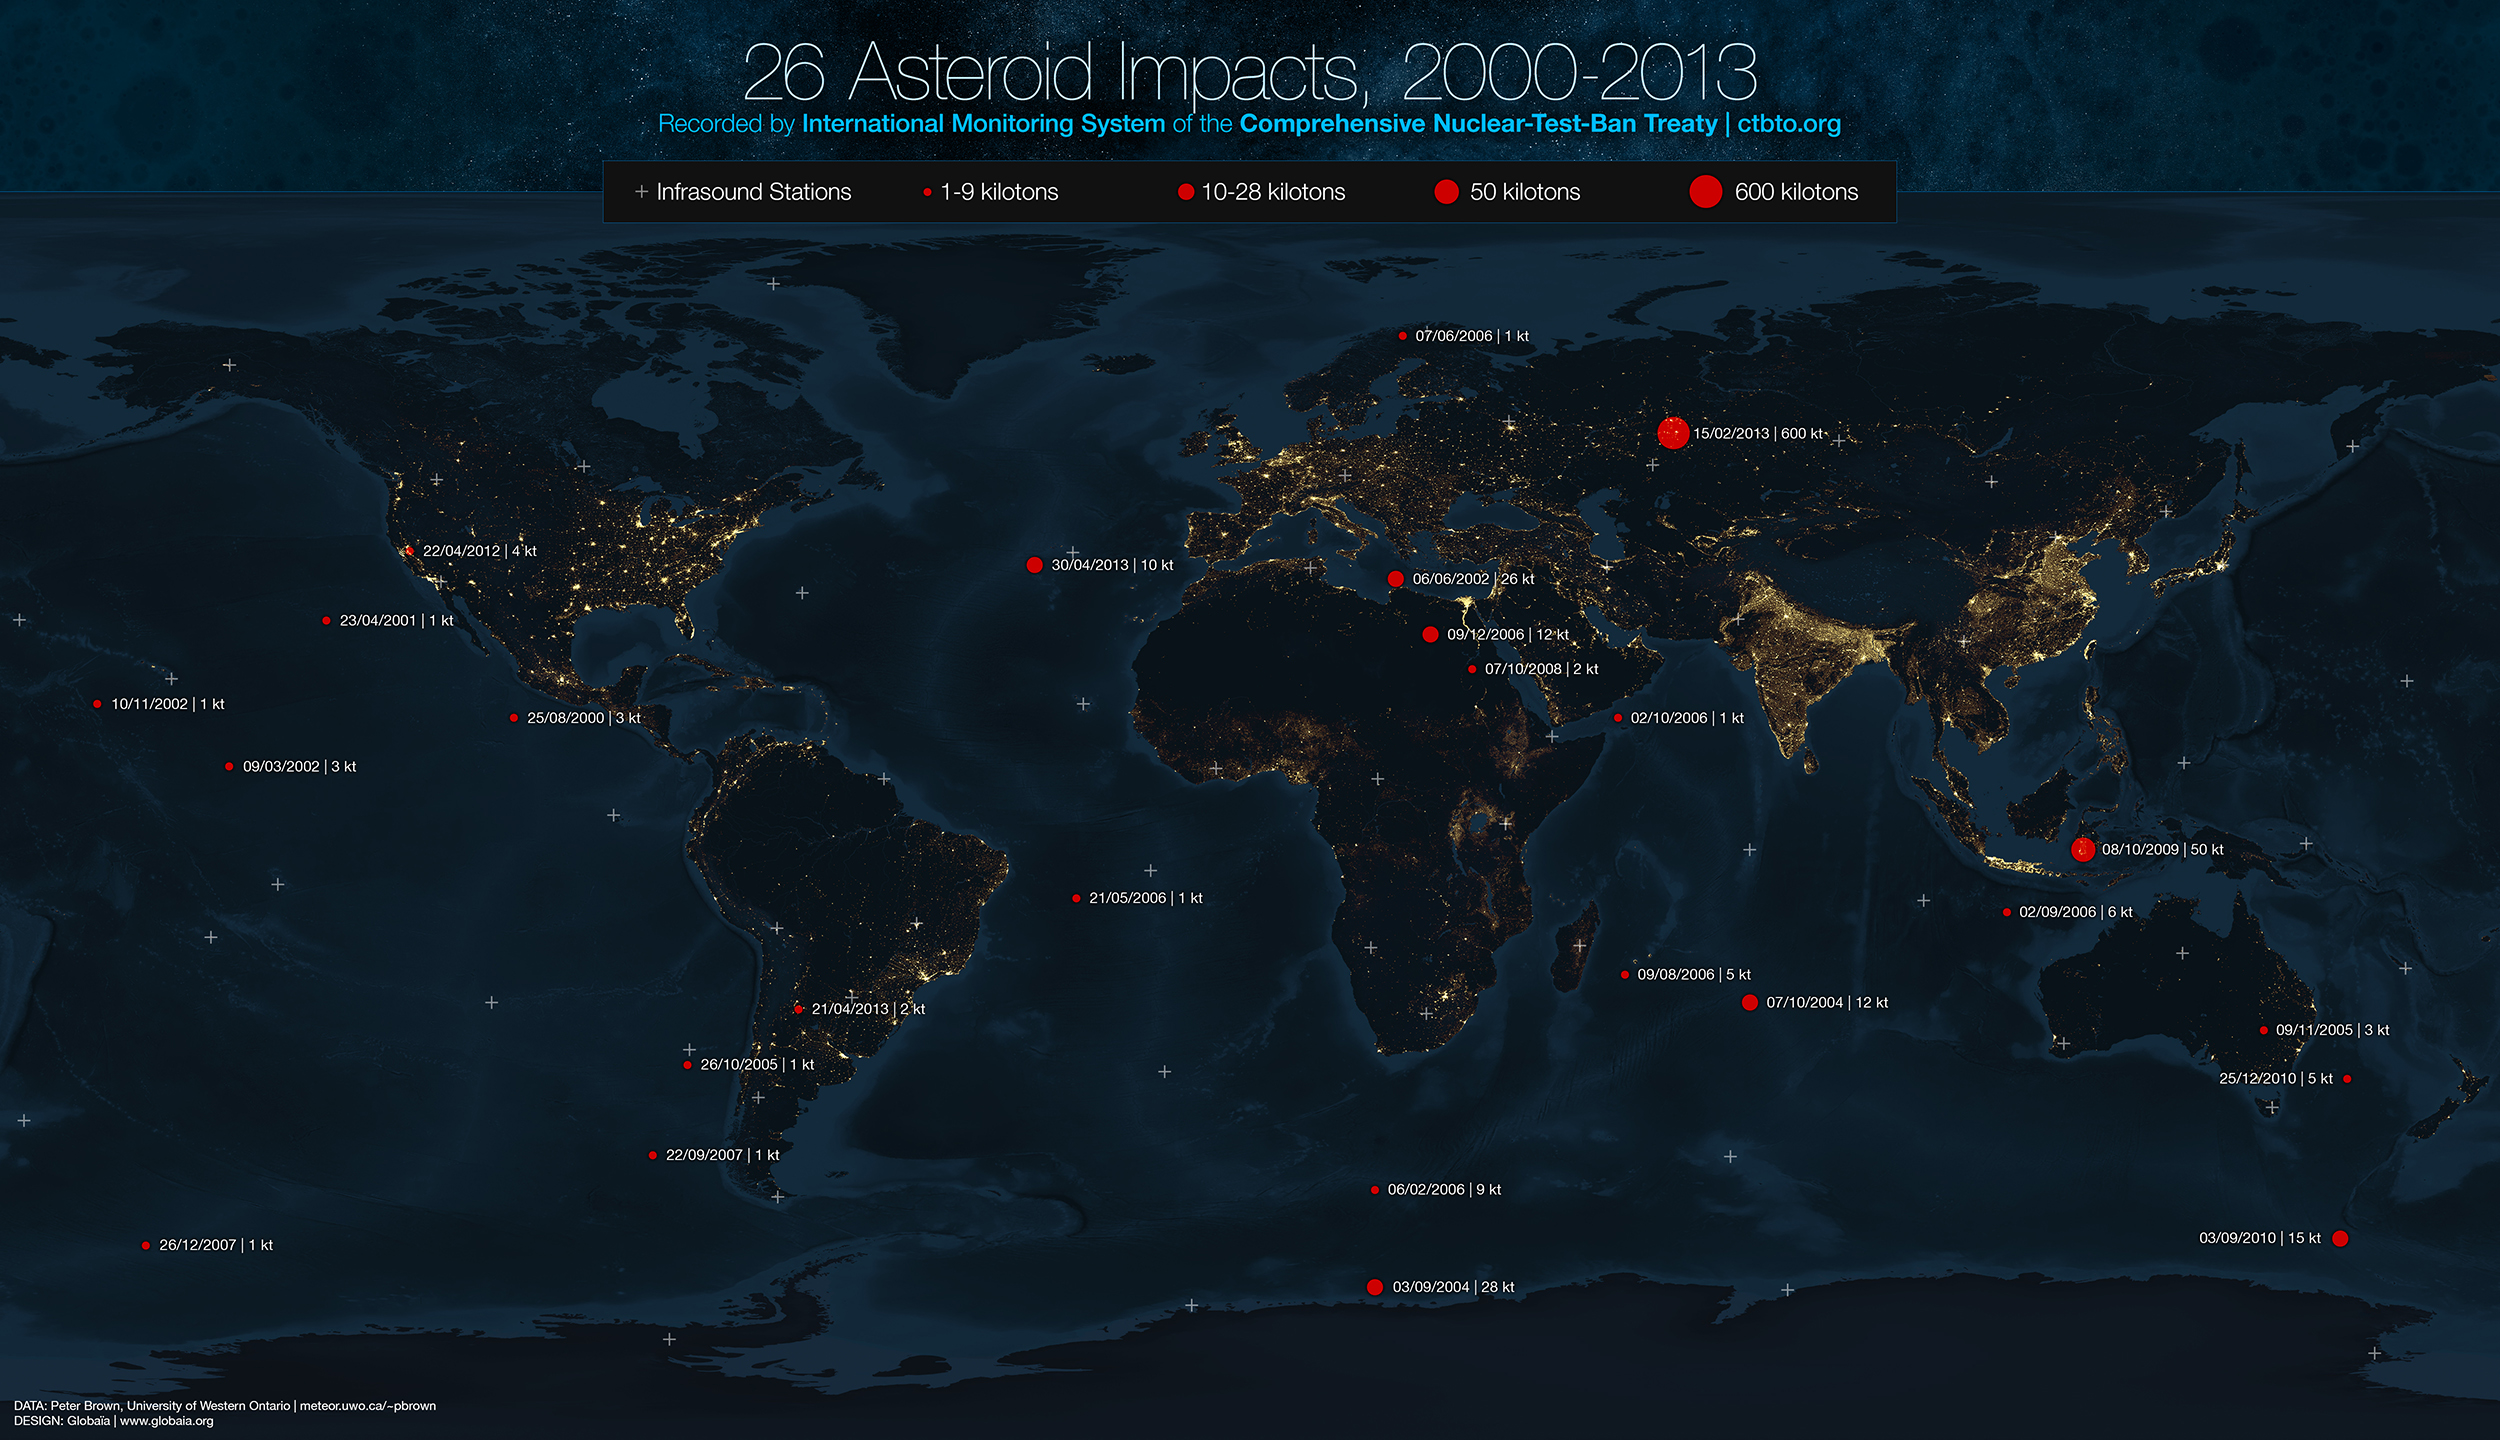 world map reveals 26 asteroid impacts from 2000 to 2013